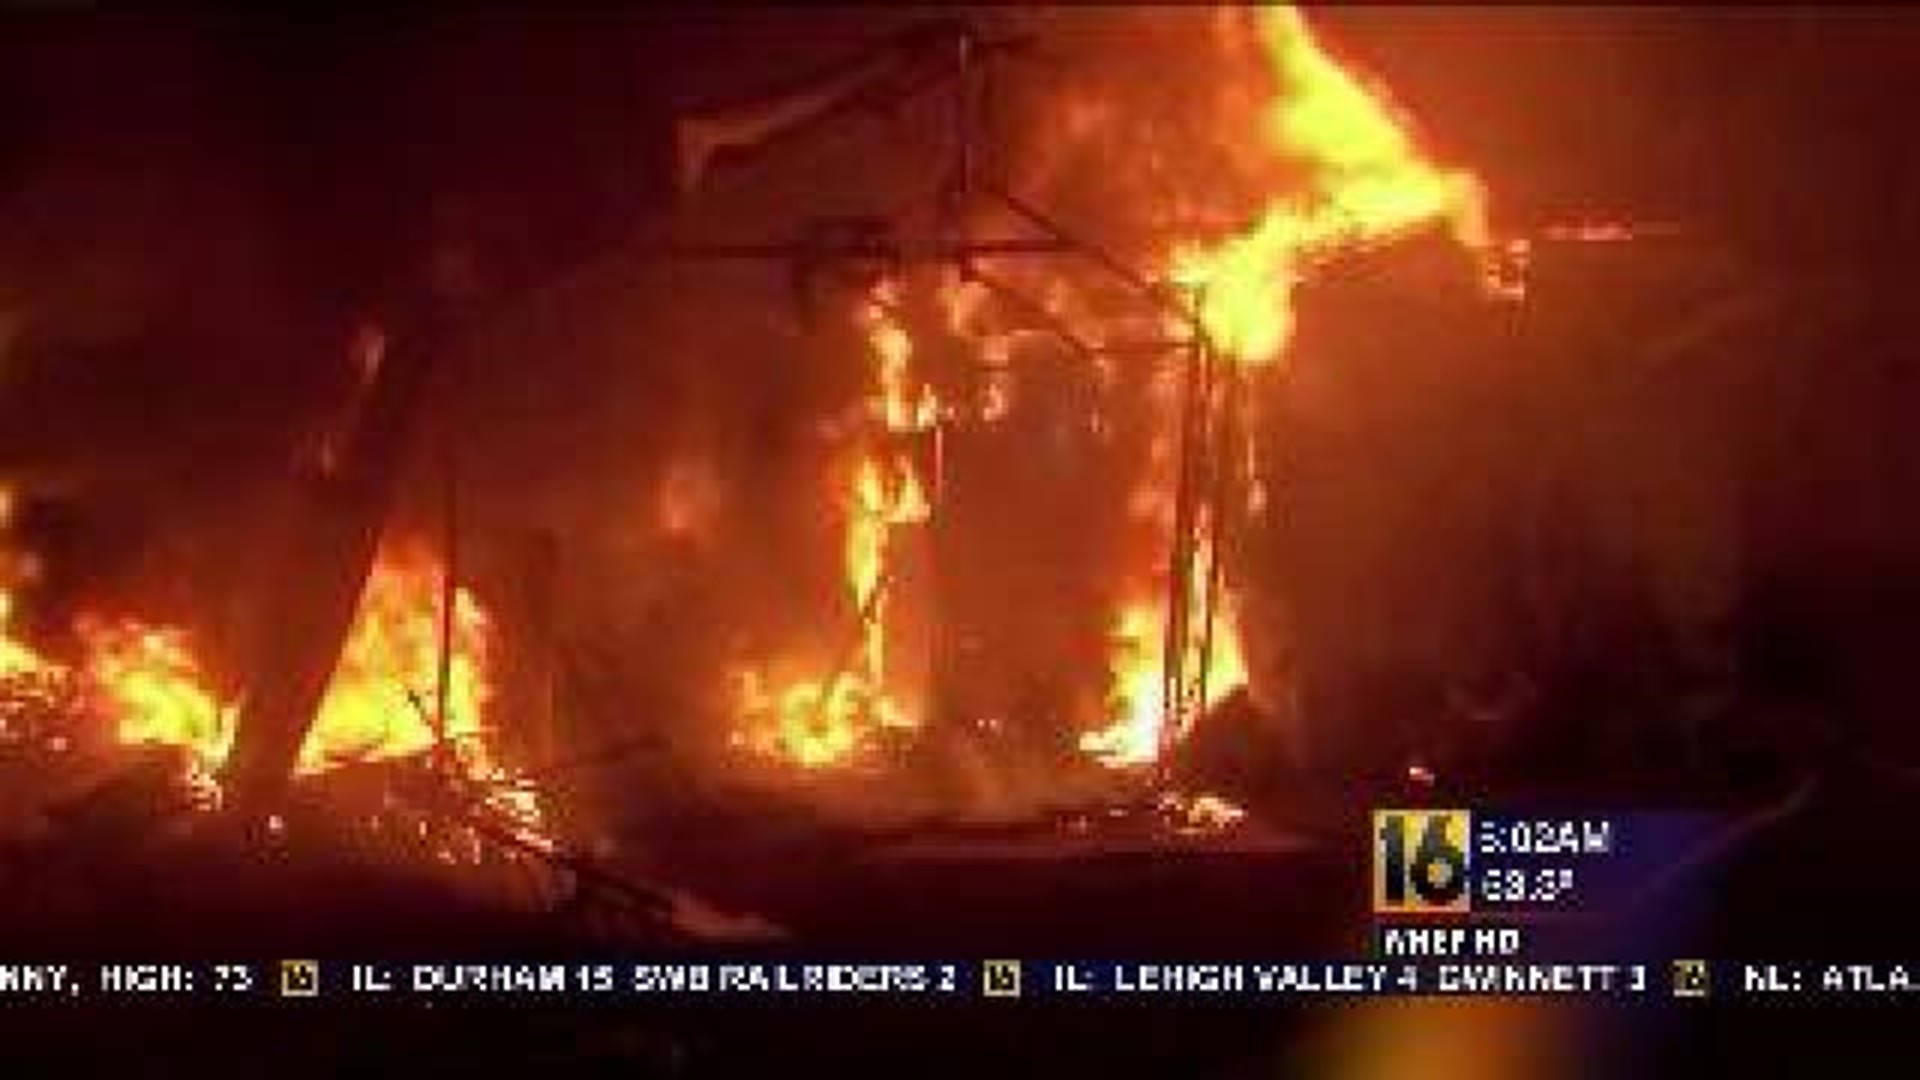 Woman, Pets Survive Late Night Fire